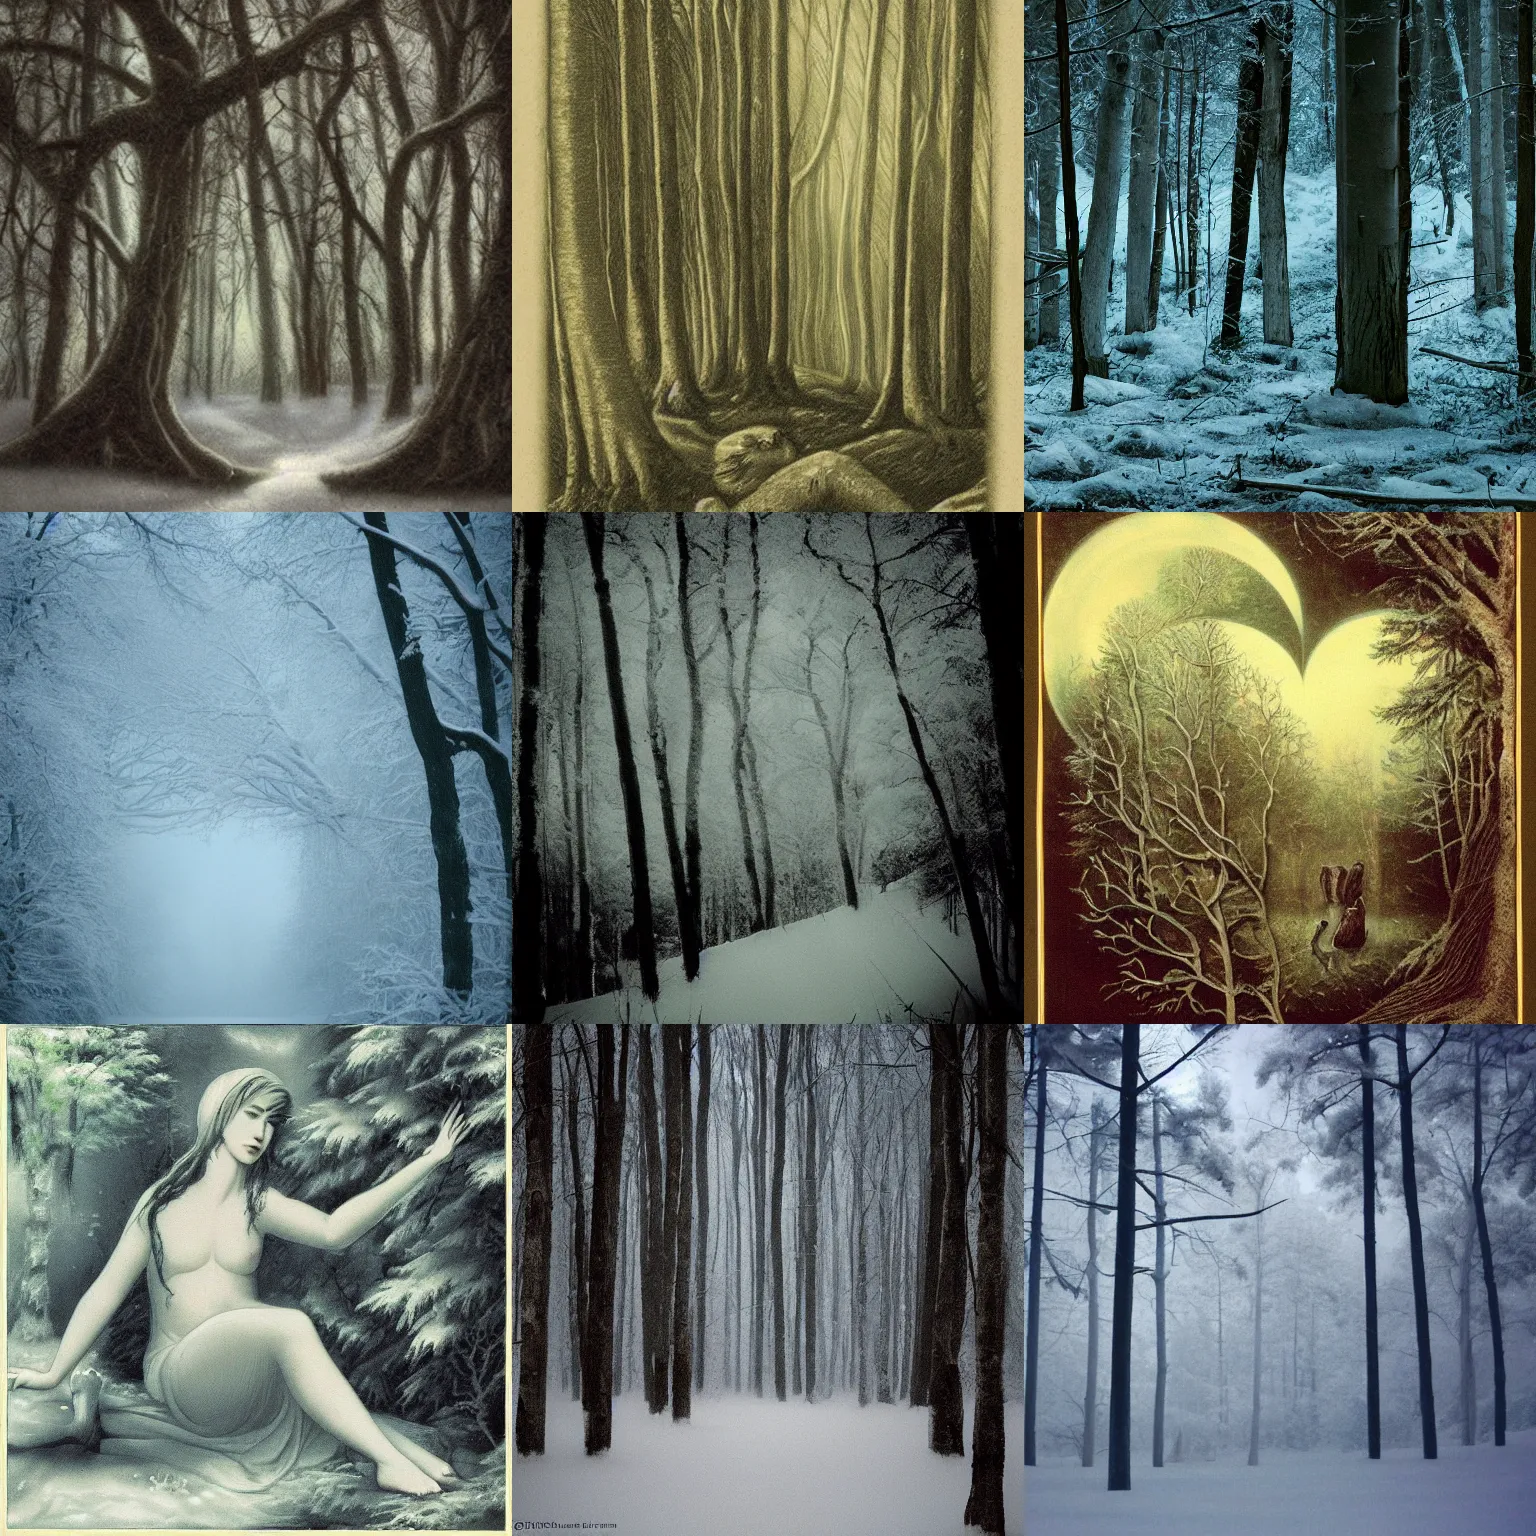 Prompt: Permeate me, O night, as with the forest you did, for heart is cold, cold as ice